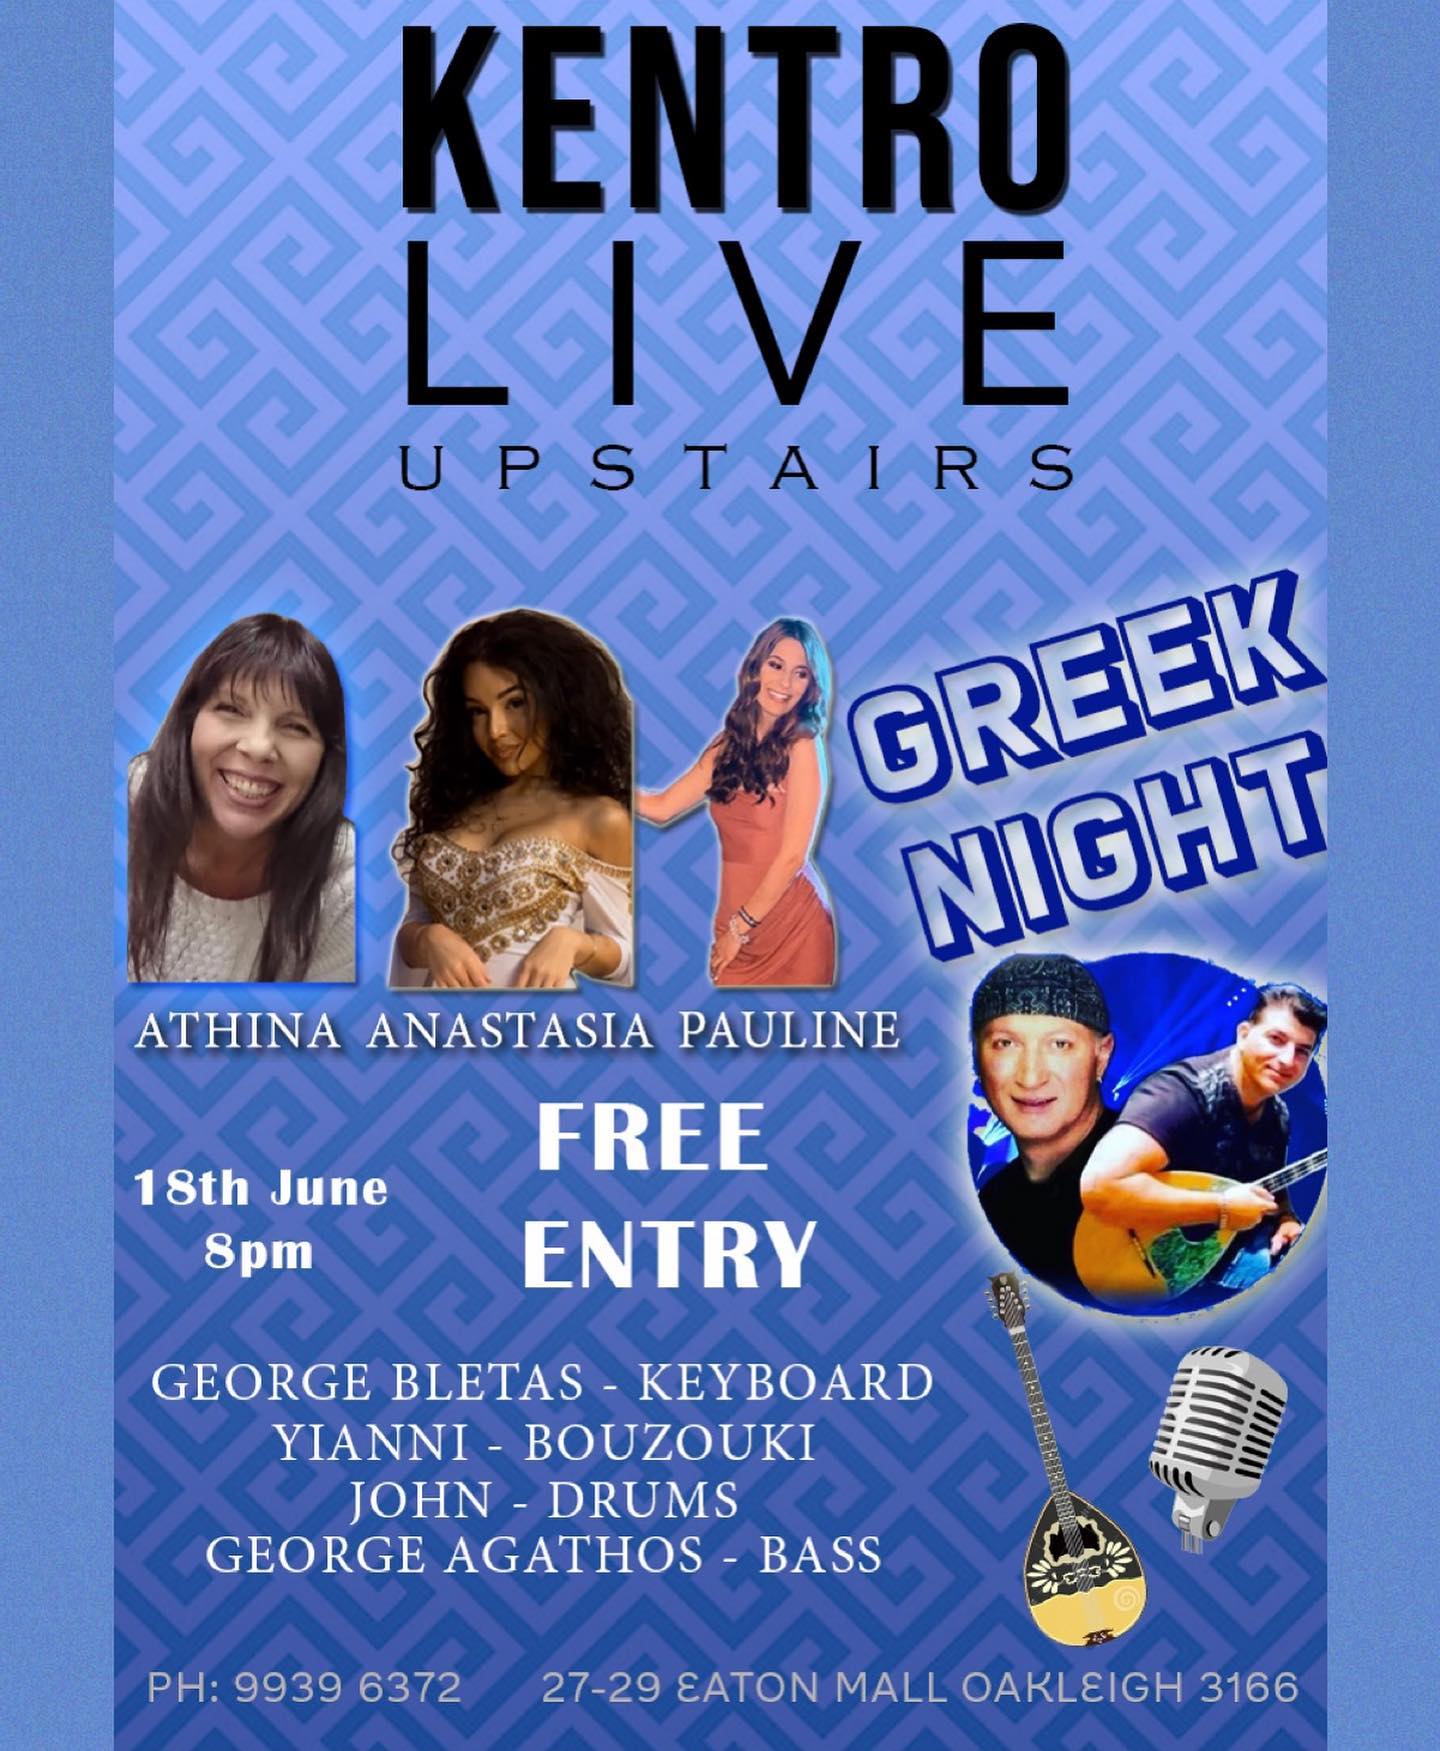 🎤KENTRO LIVE 🎶
JUNE 18
Limited Tables Available
(03) 9939 6372 📞🇬🇷